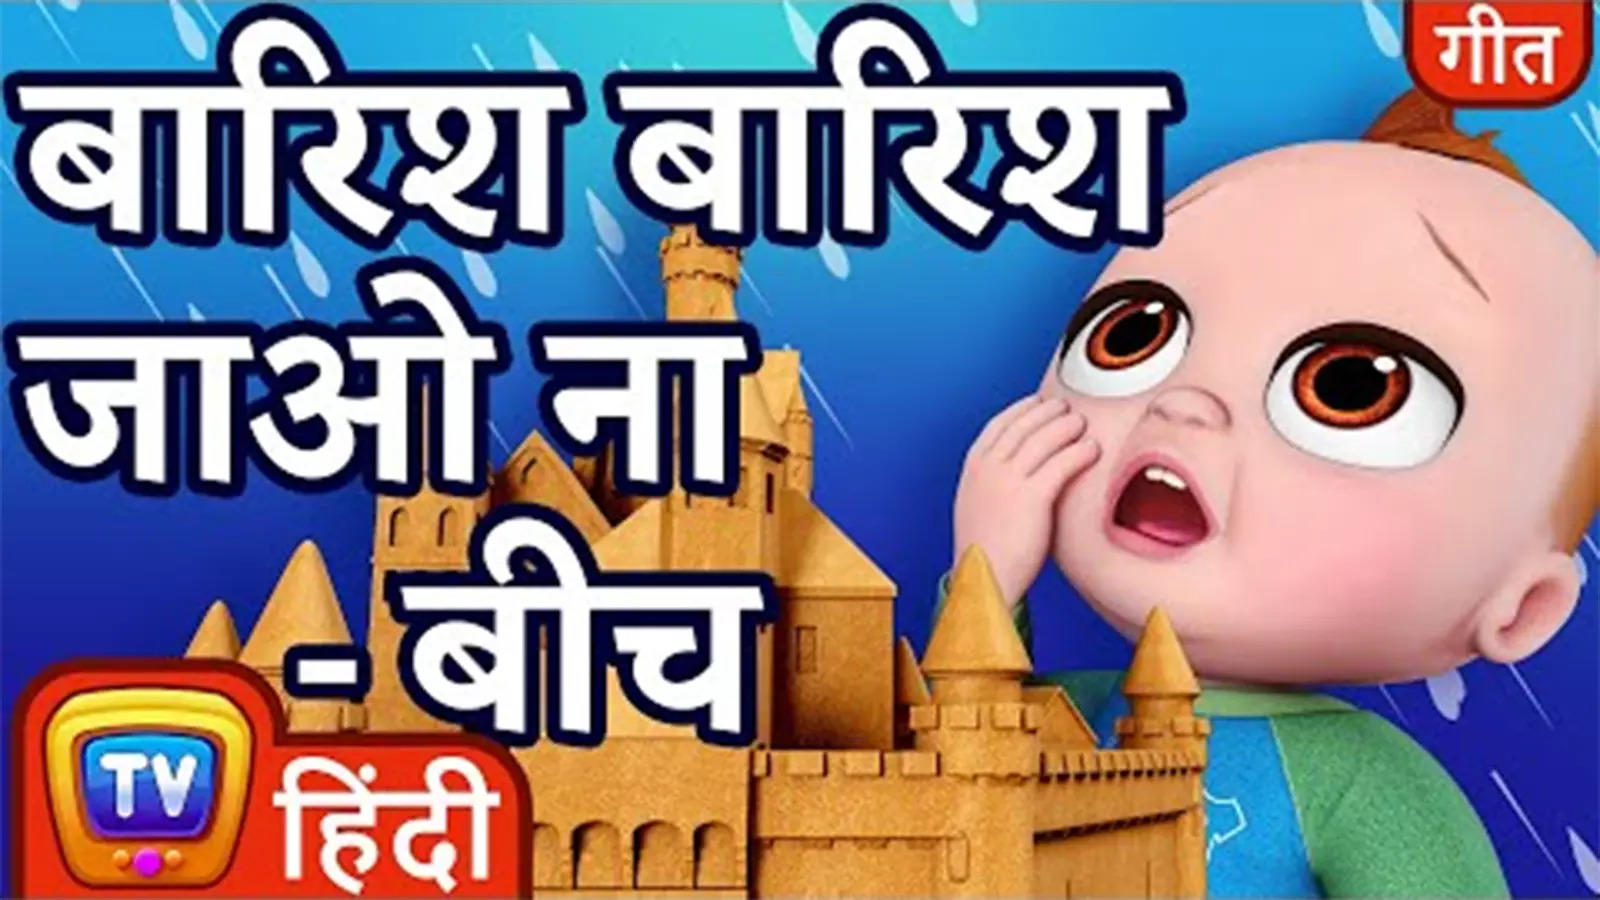 Popular Kids Songs And Hindi Nursery Rhyme 'Rain Rain Go Away' For Kids -  Check Out Children's Nursery Rhymes, Baby Songs, Fairy Tales And Many More  In Hindi | Entertainment - Times